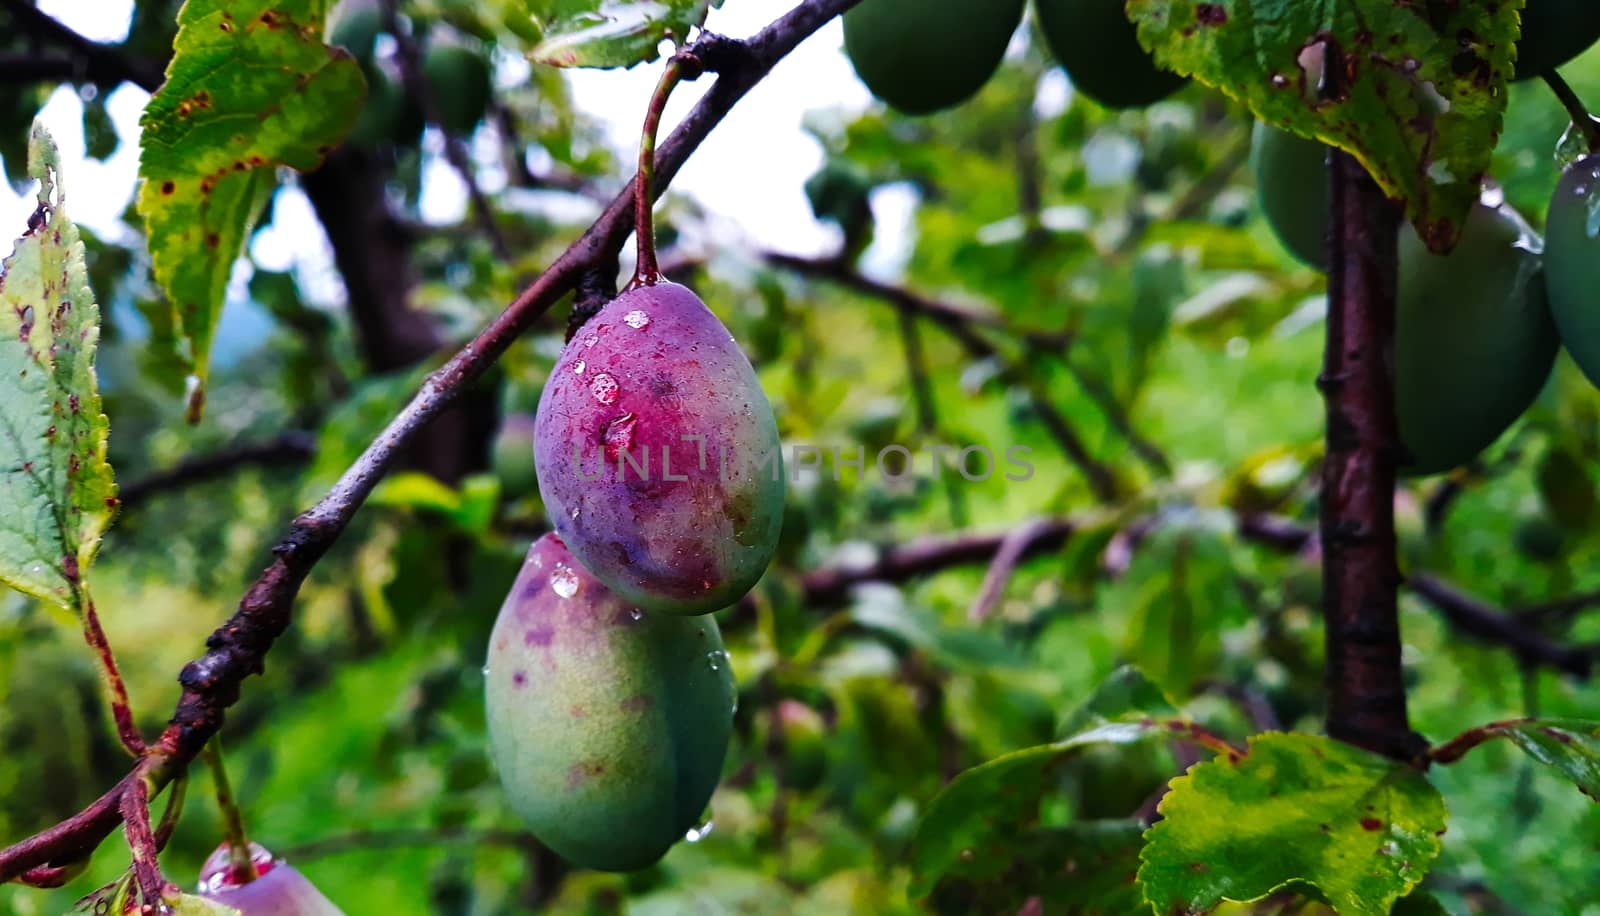 The plums on the branch are starting to turn blue. Painted after the rain with drops of water on it. Plum fruits. Zavidovici, Bosnia and Herzegovina.